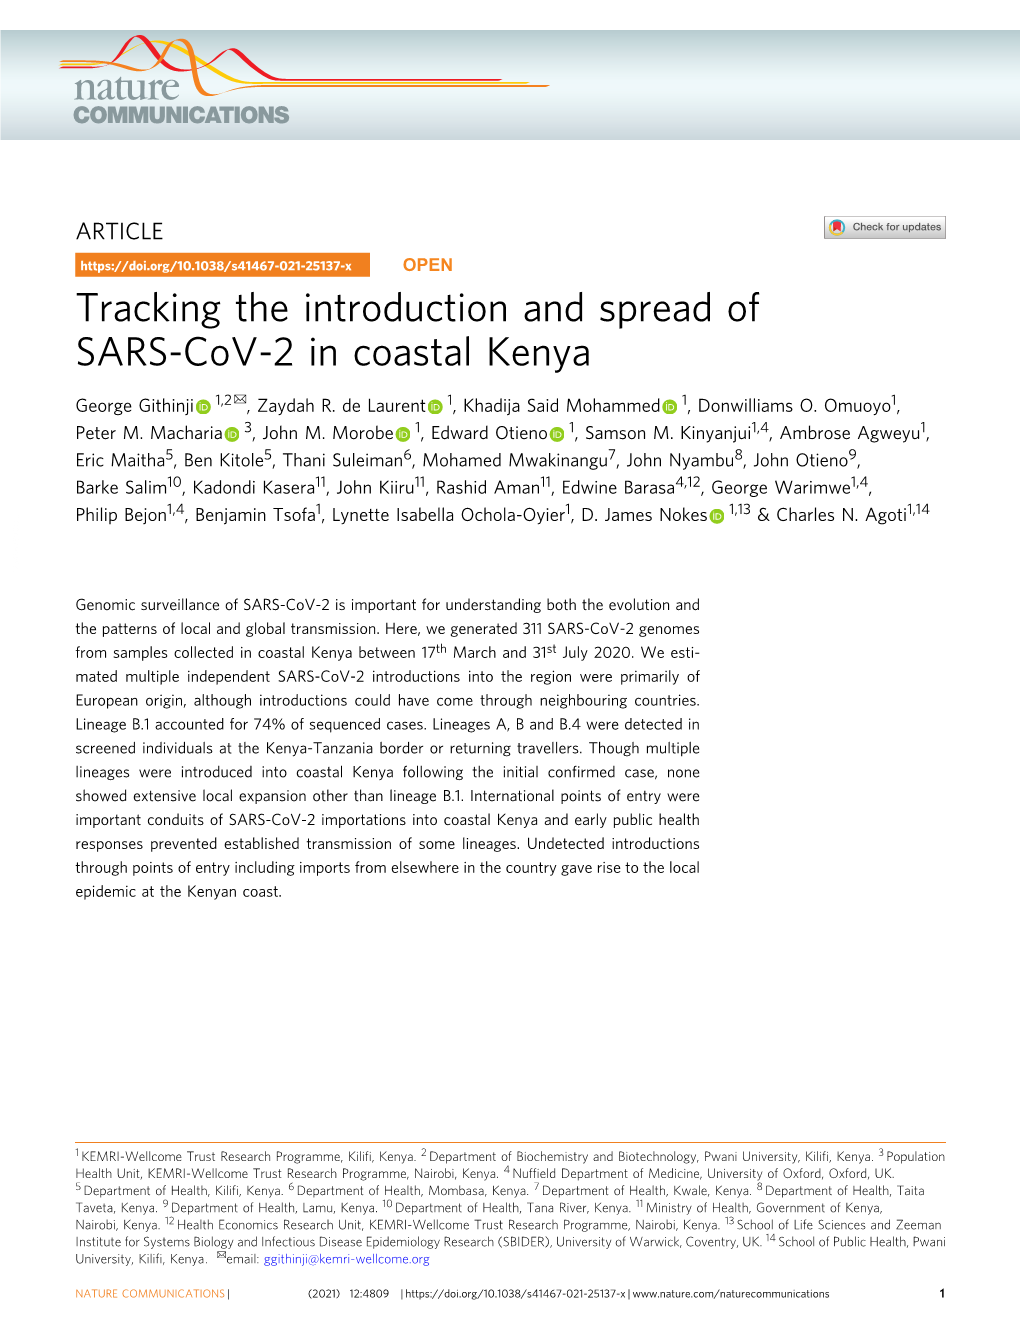 Tracking the Introduction and Spread of SARS-Cov-2 in Coastal Kenya ✉ George Githinji 1,2 , Zaydah R